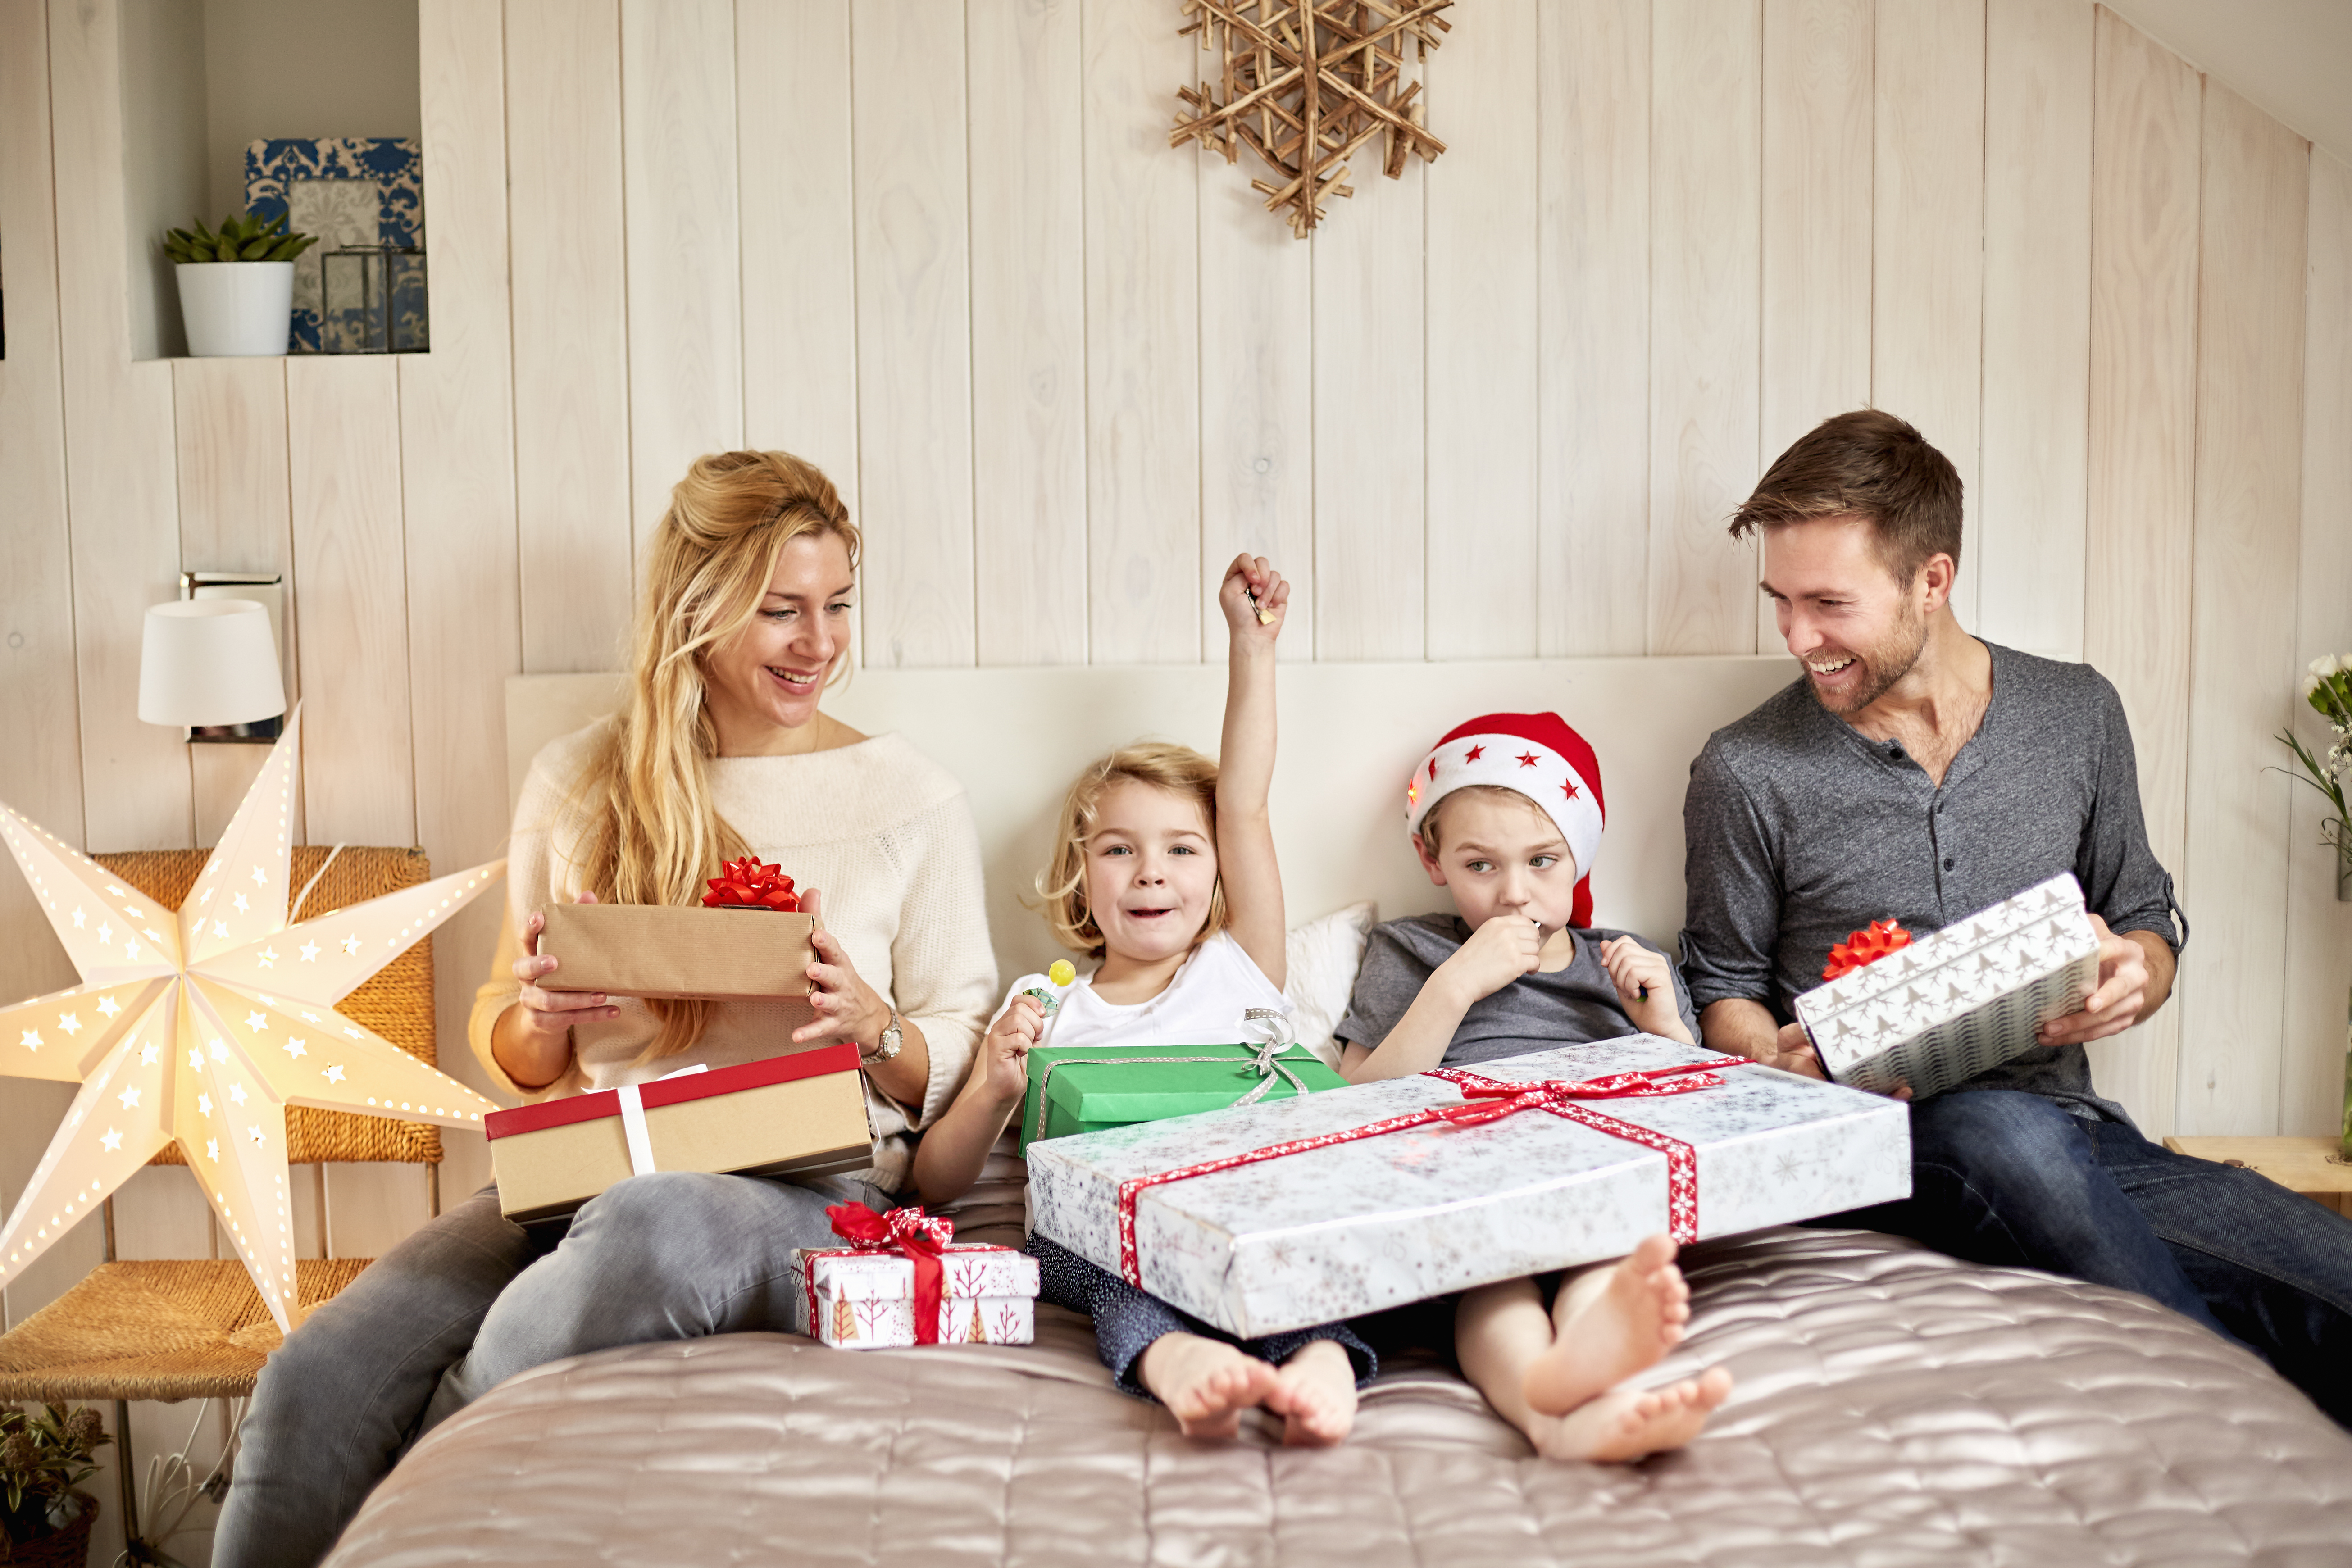 With these tips, you'll be set to have a great Christmas!